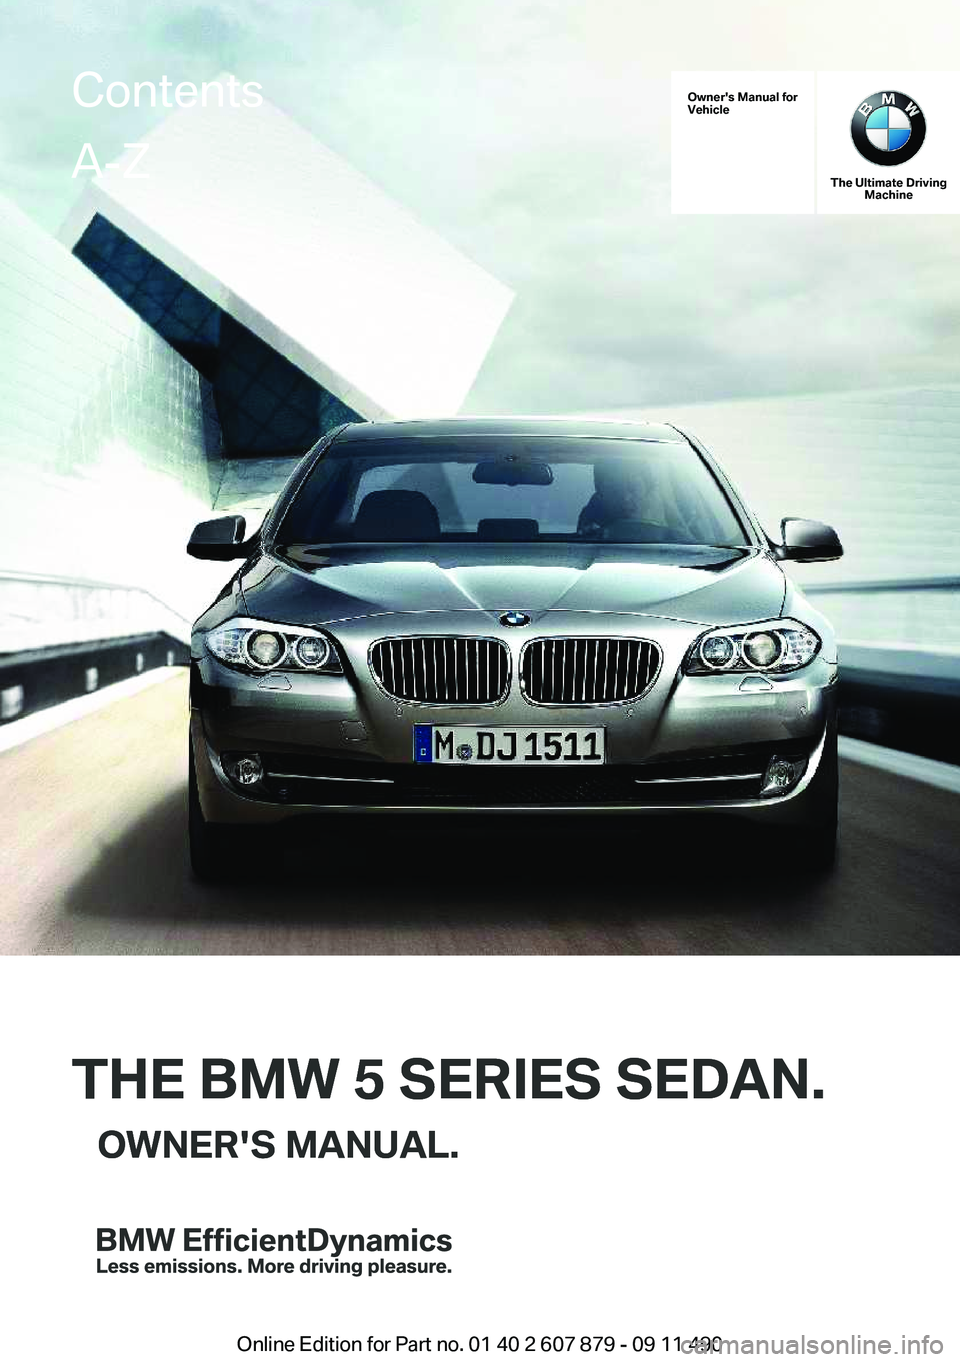 BMW 528I XDRIVE SEDAN 2012  Owners Manual Owner's Manual for
Vehicle
THE BMW 5 SERIES SEDAN.OWNER'S MANUAL.
The Ultimate Driving Machine
THE BMW 5 SERIES SEDAN.OWNER'S MANUAL.
ContentsA-Z
Online Edition for Part no. 01 40 2 607 87